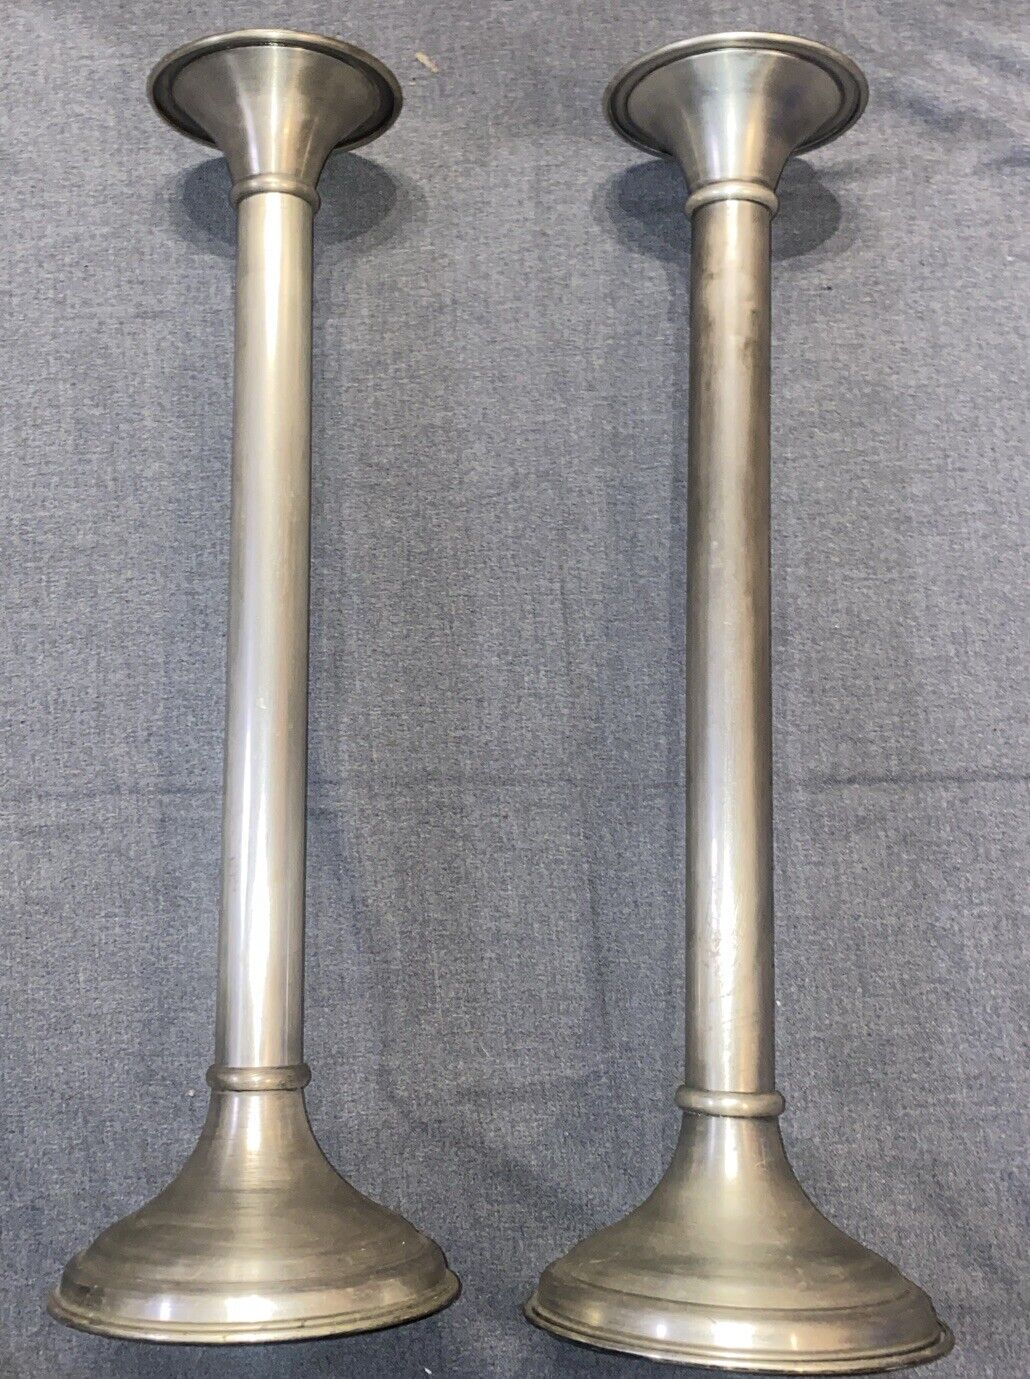 The Bombay Company Large Brushed Silver Tone Candle Holder Pair